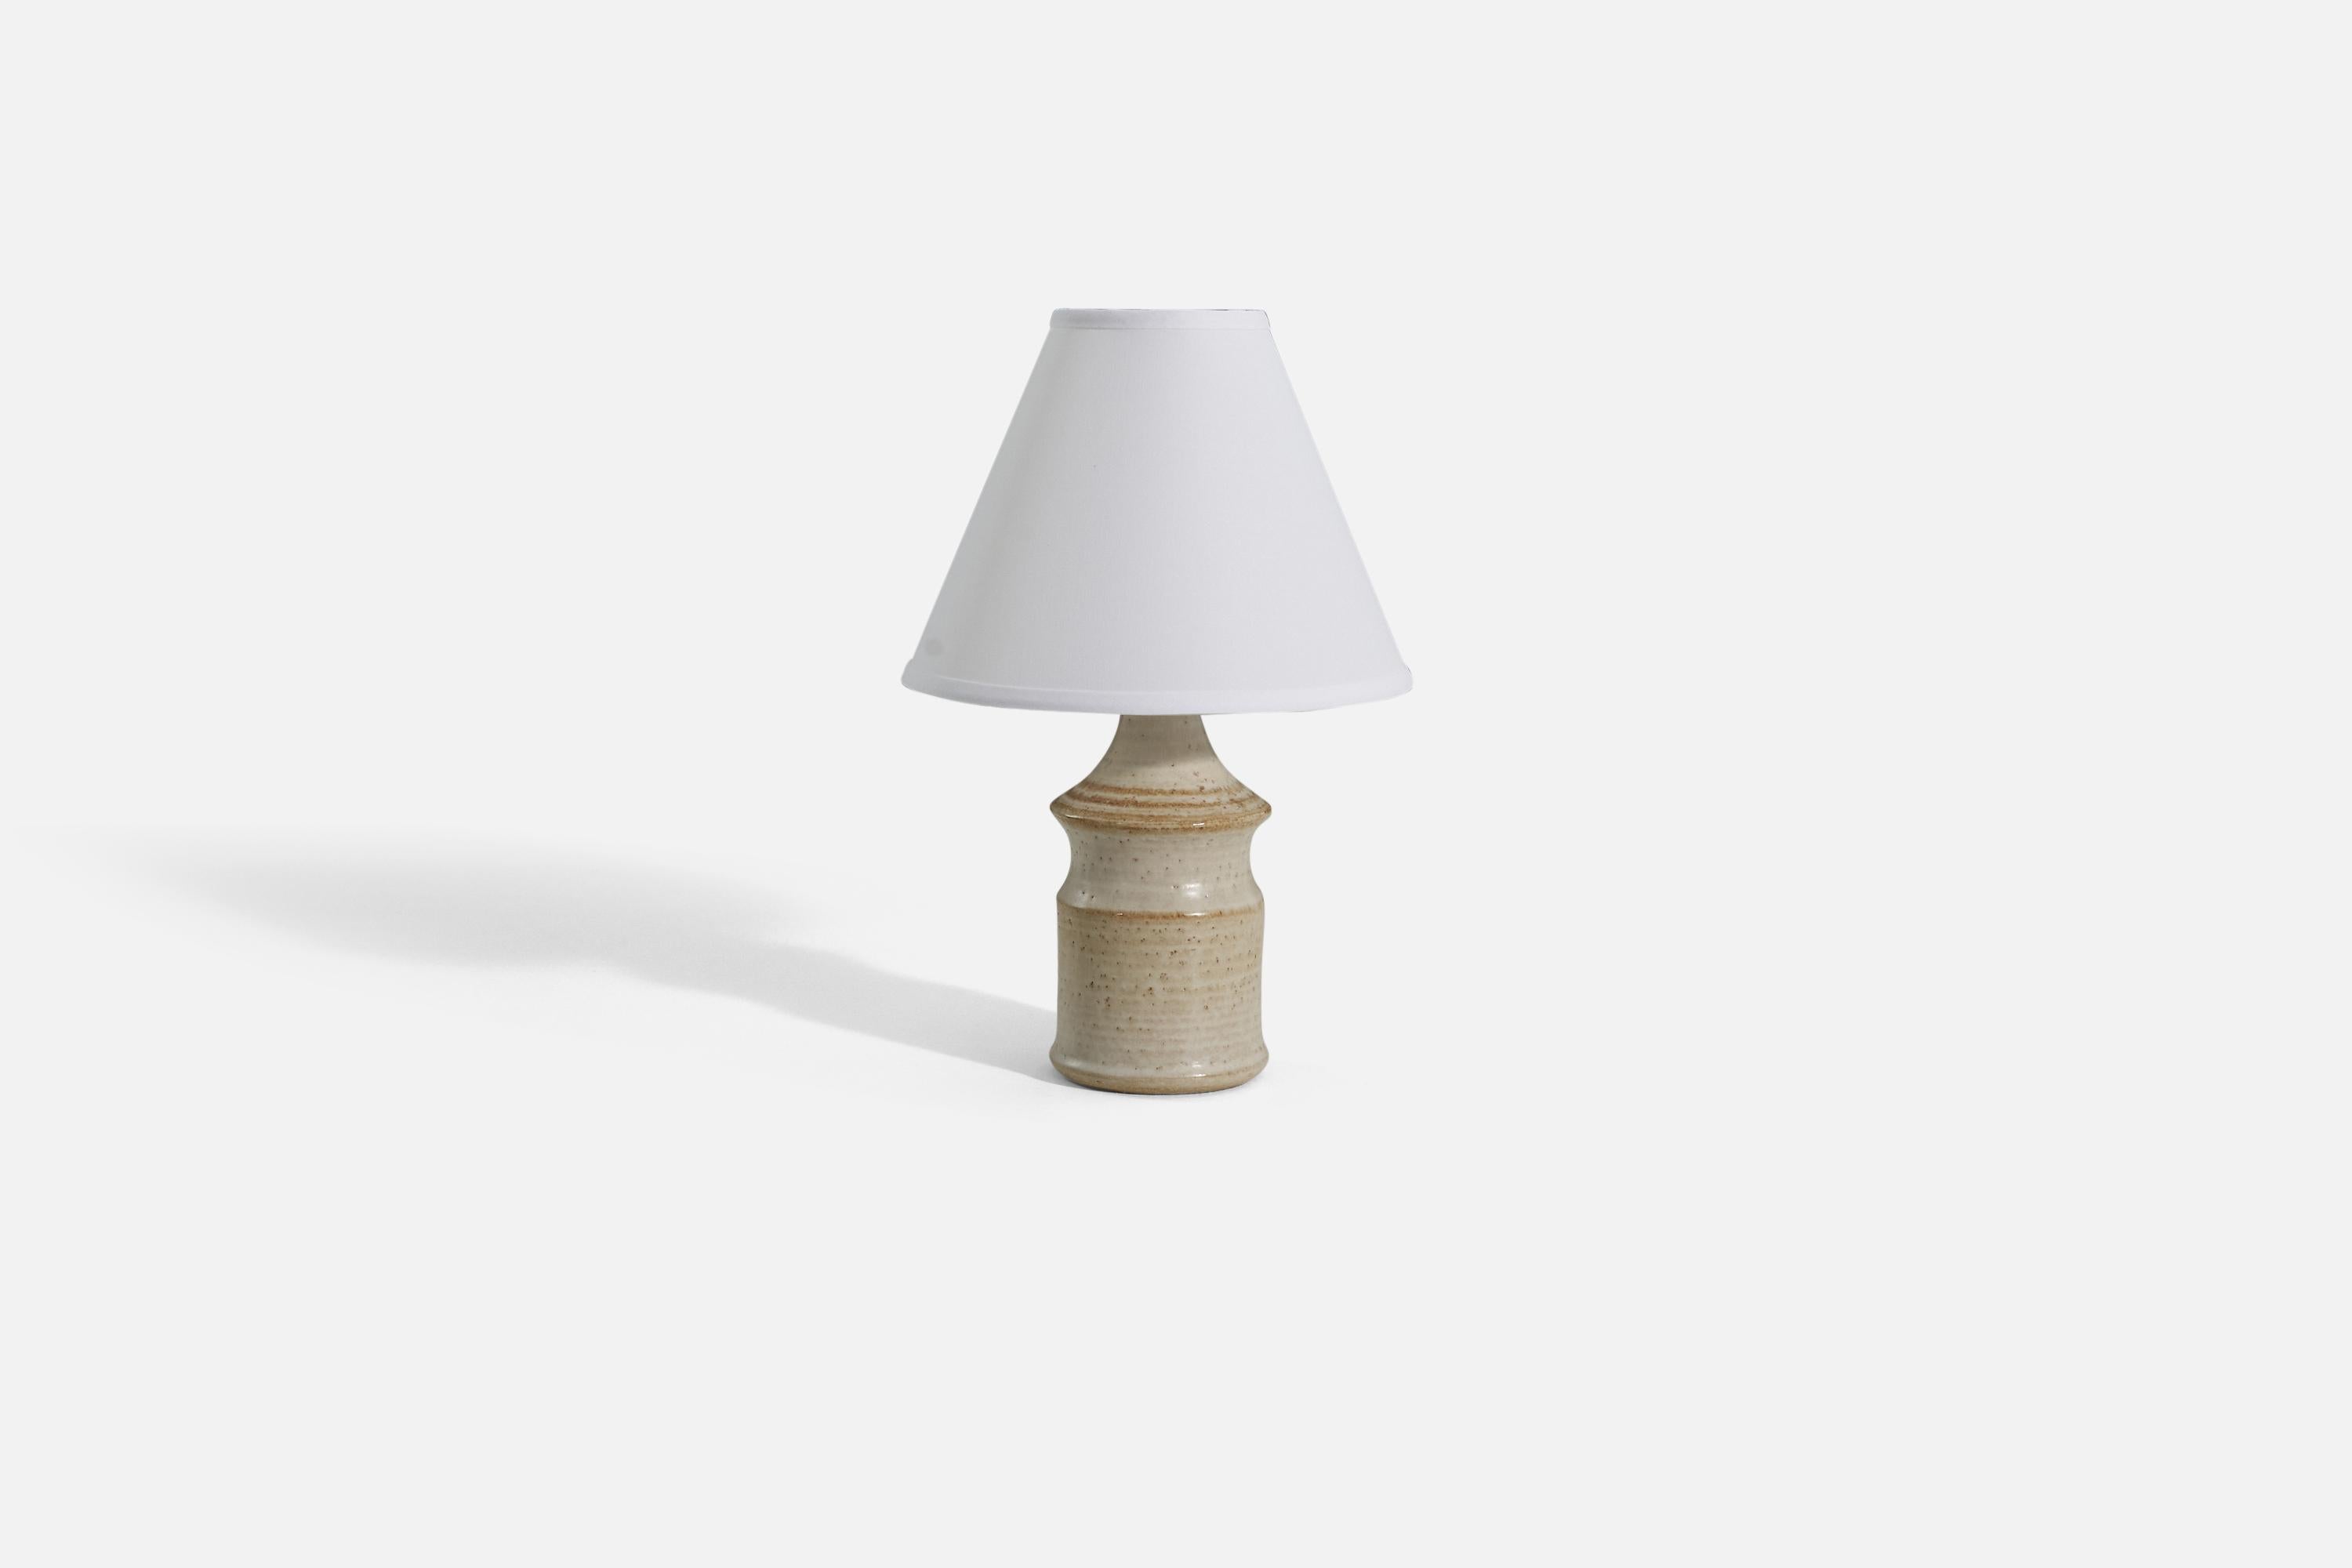 An off-white and brown striped table lamp produced by Søholm Keramik, located on the island of Bornholm in Denmark. 

Sold without lampshade. 

Dimensions of Lamp (inches) : 12 x 4.5 x 4.5 (H x W x D)
Dimensions Shade (inches) : 4.25 x 10.25 x